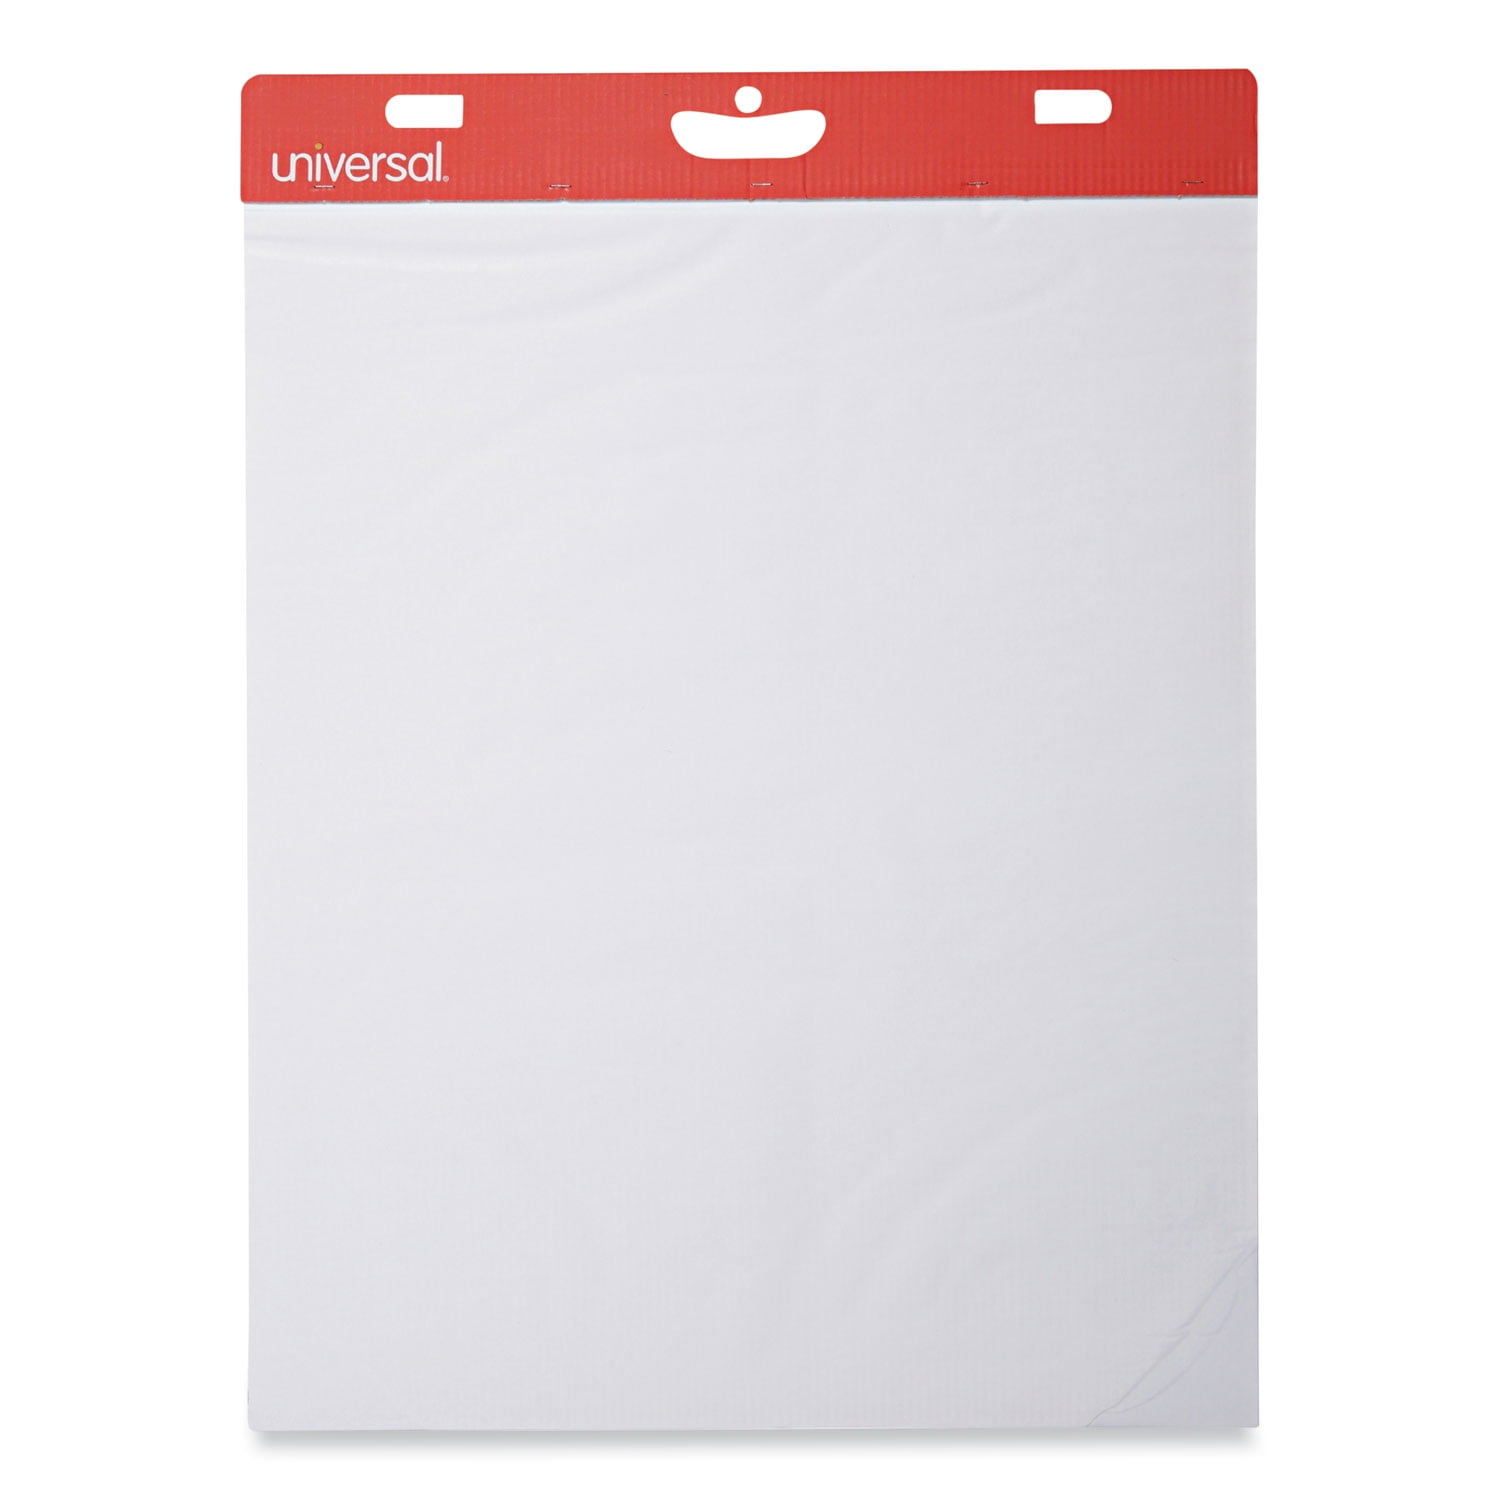 Post-it® Super Sticky Easel Pad - 30 Sheets - Ruled25 x 30 - Self-stick,  Resist Bleed-through, Handle, Sturdy Backcard, Universal Slot,  Repositionable, Adhesive Backing - 1 / Pack - Office Mall